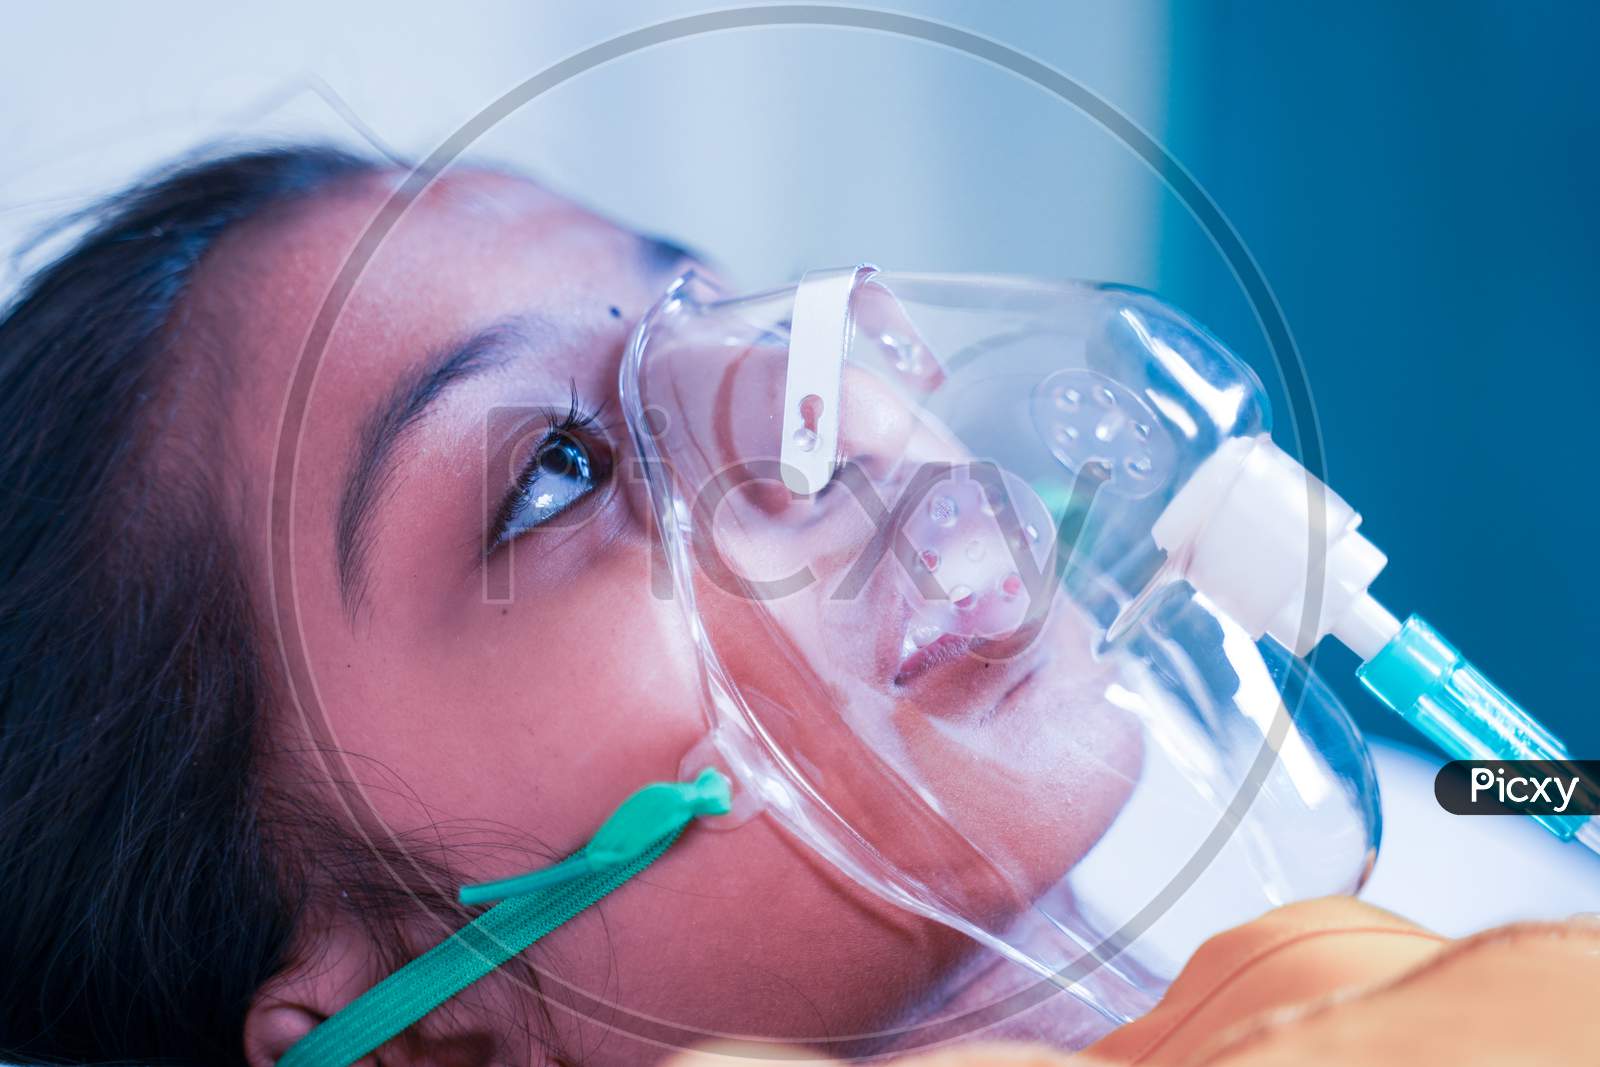 Close Up Shot Of Little Girl Kid Breathing On Ventilator Oxygen Mask At Hospital Due To Coronavirus Covid-19 Breath Shortness Or Dyspnea - Concept Of Children Healthcare And Medical During Pandemic.